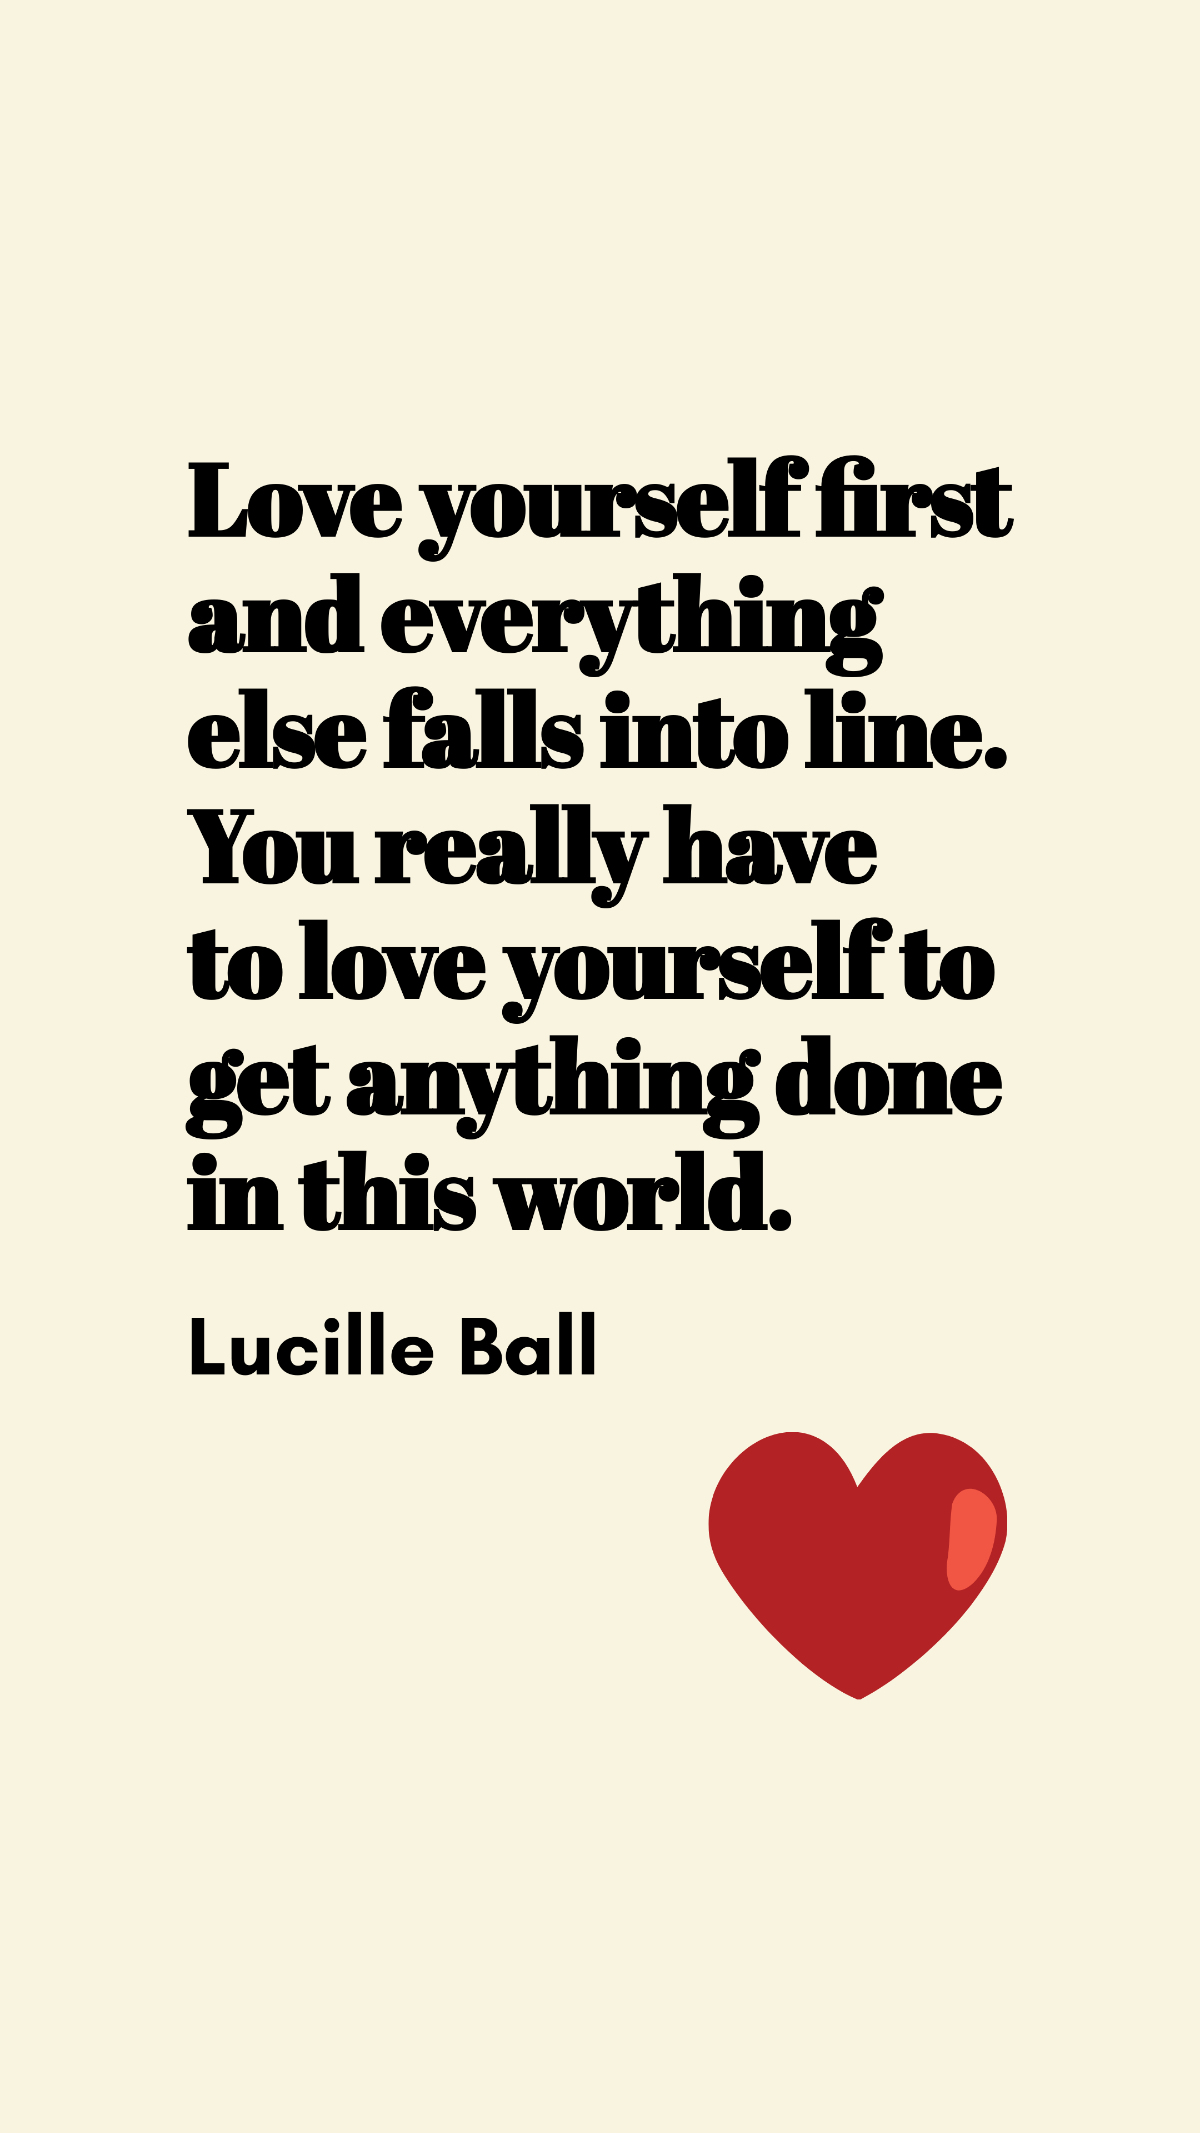 Lucille Ball - Love yourself first and everything else falls into line. You really have to love yourself to get anything done in this world. Template